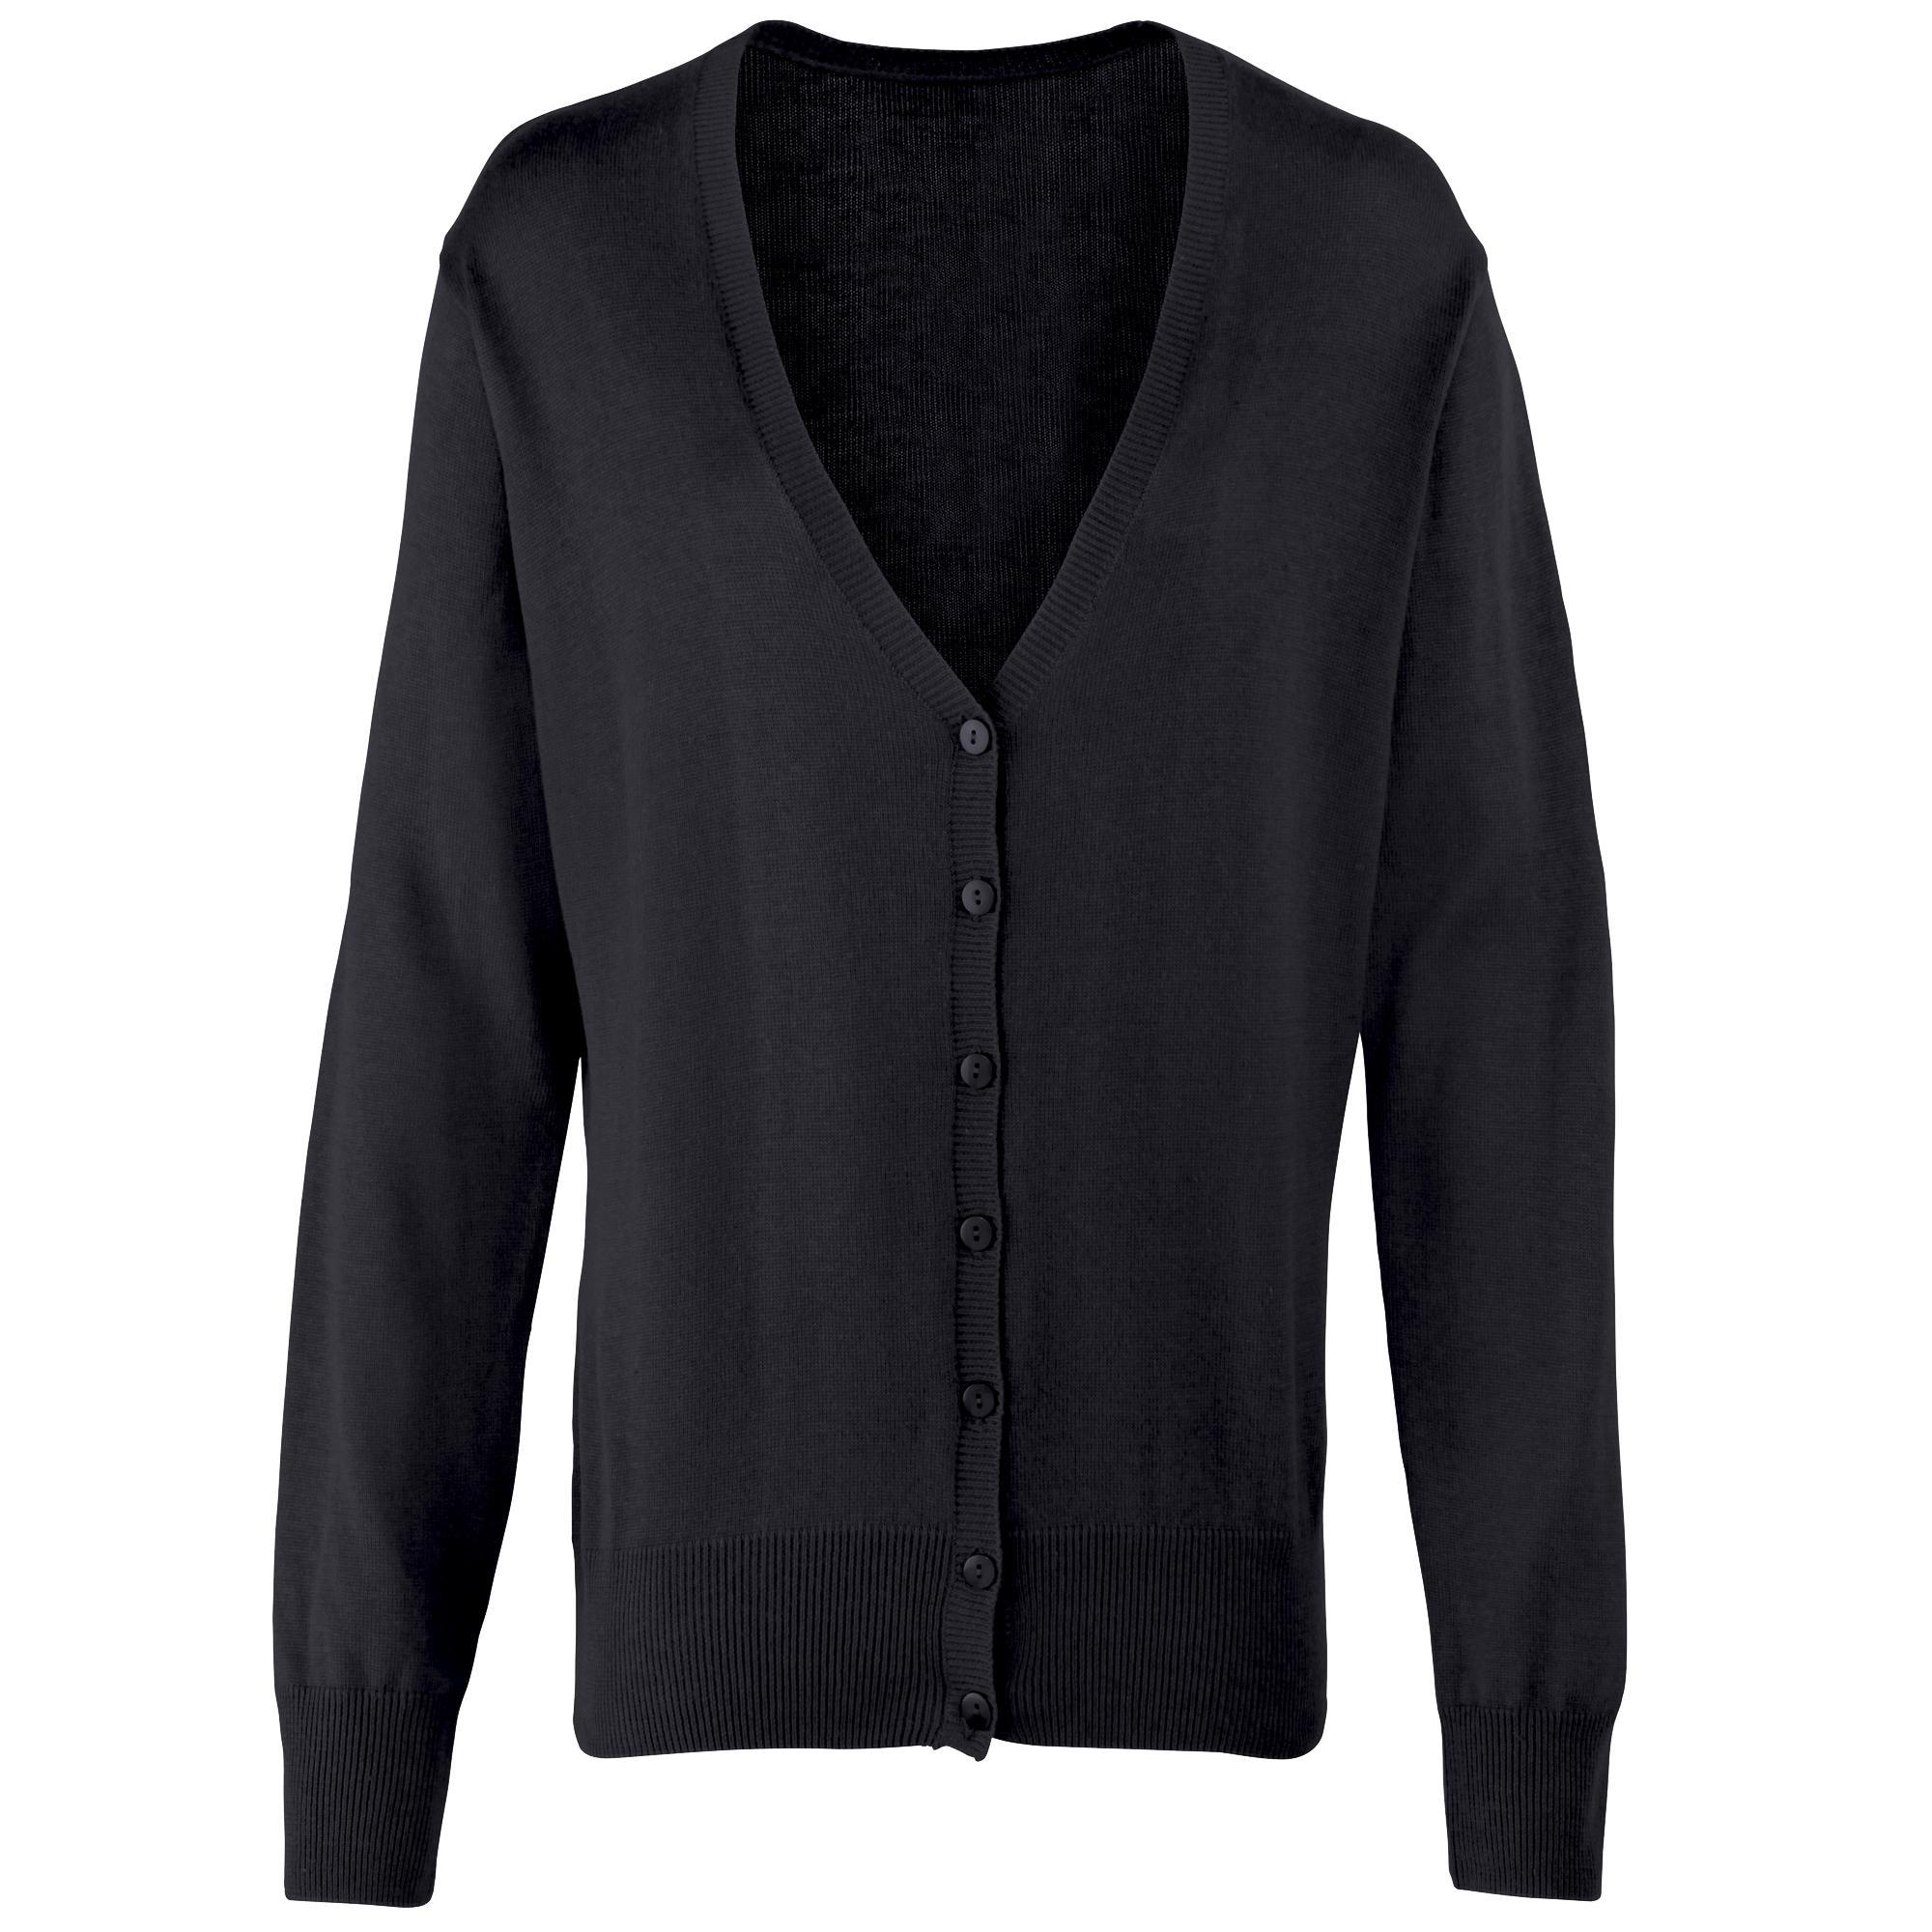 Premier Womens/Ladies Button Through Long Sleeve V-neck Knitted Cardigan (Black) (14)